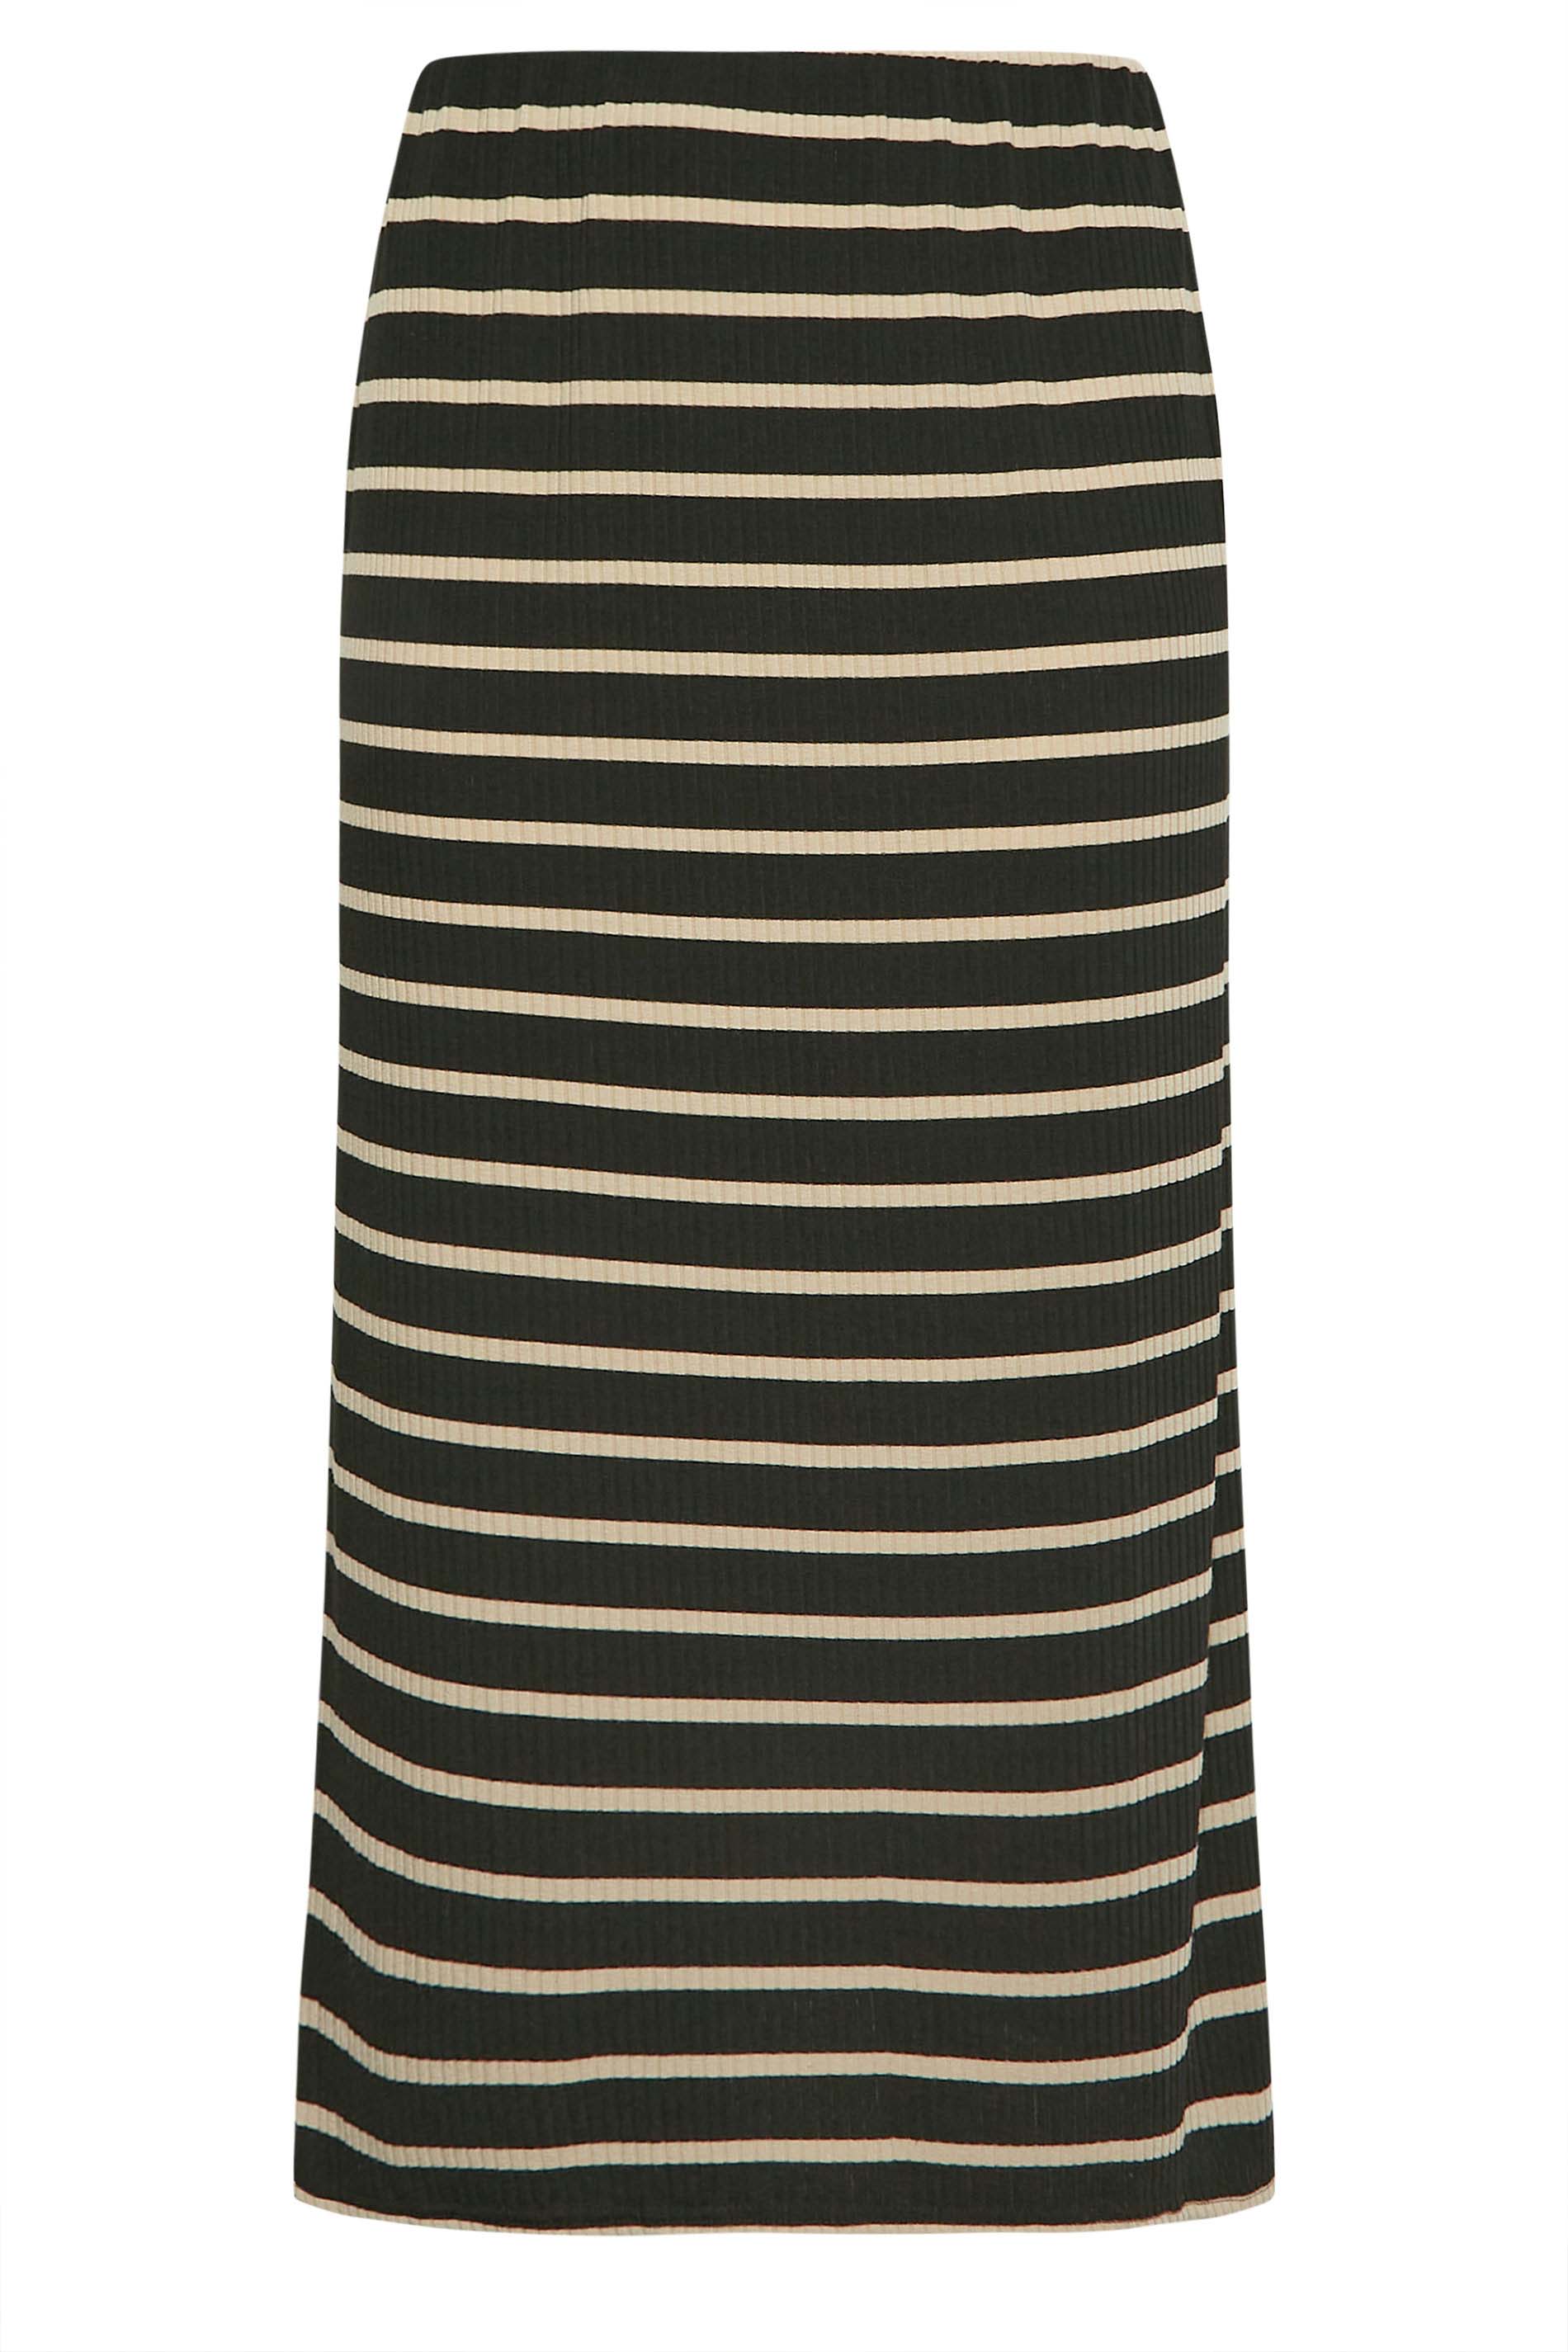 Yours Plus Size Black And Beige Brown Stripe Ribbed Maxi Skirt Yours Clothing 6276